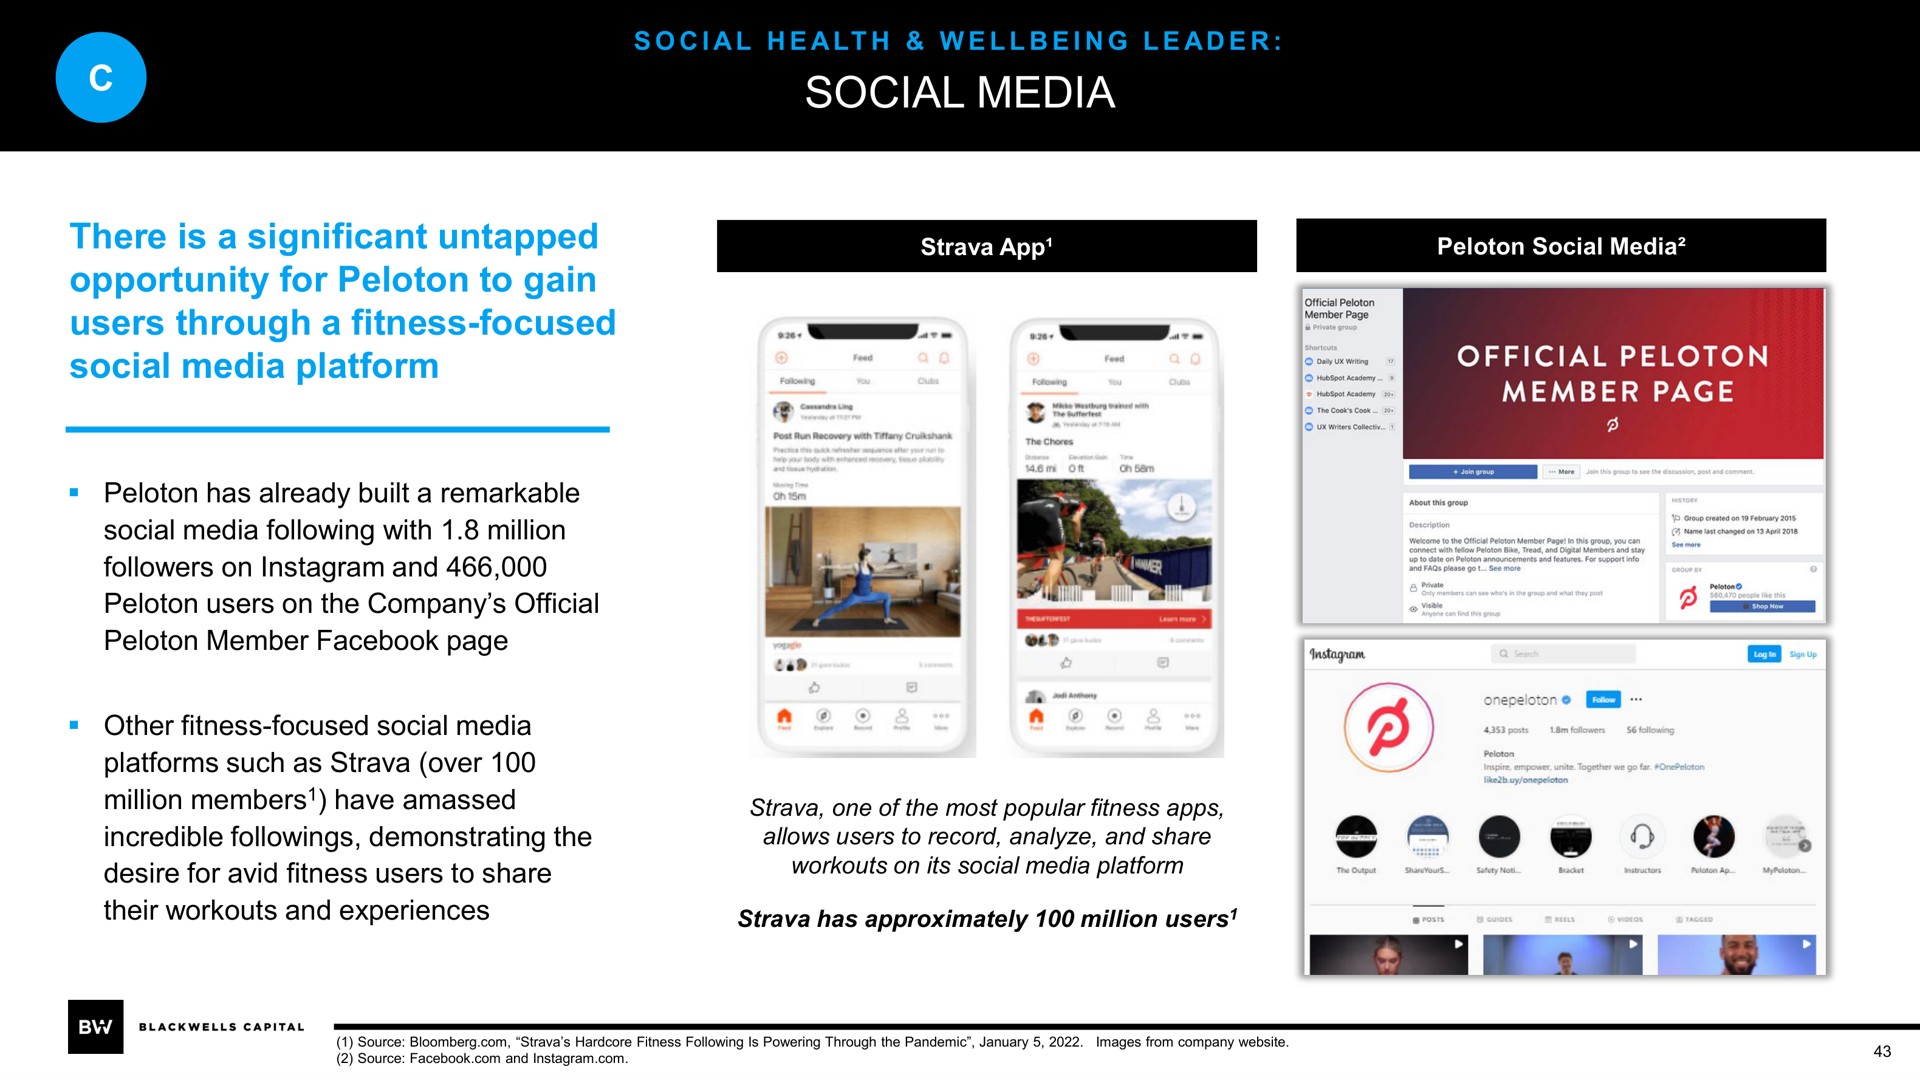 social media there is a significant untapped opportunity for peloton to gain users through a fitness focused social media platform | Blackwells Capital